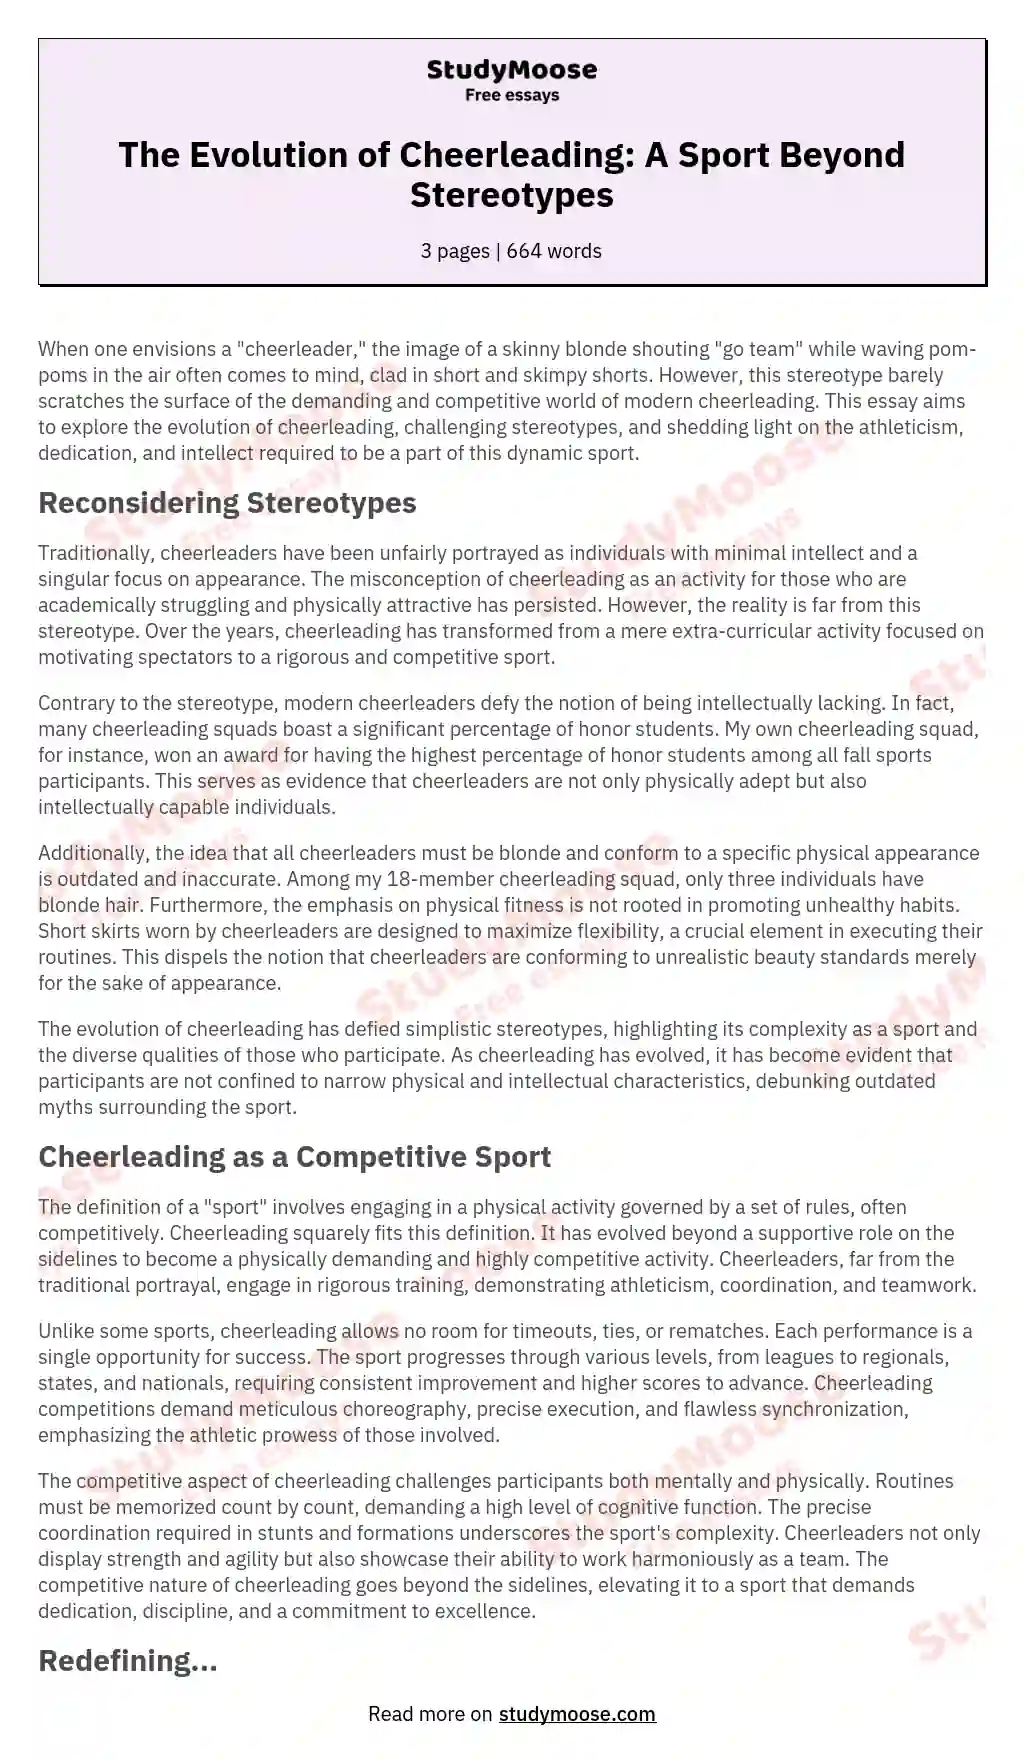 The Evolution of Cheerleading: A Sport Beyond Stereotypes essay